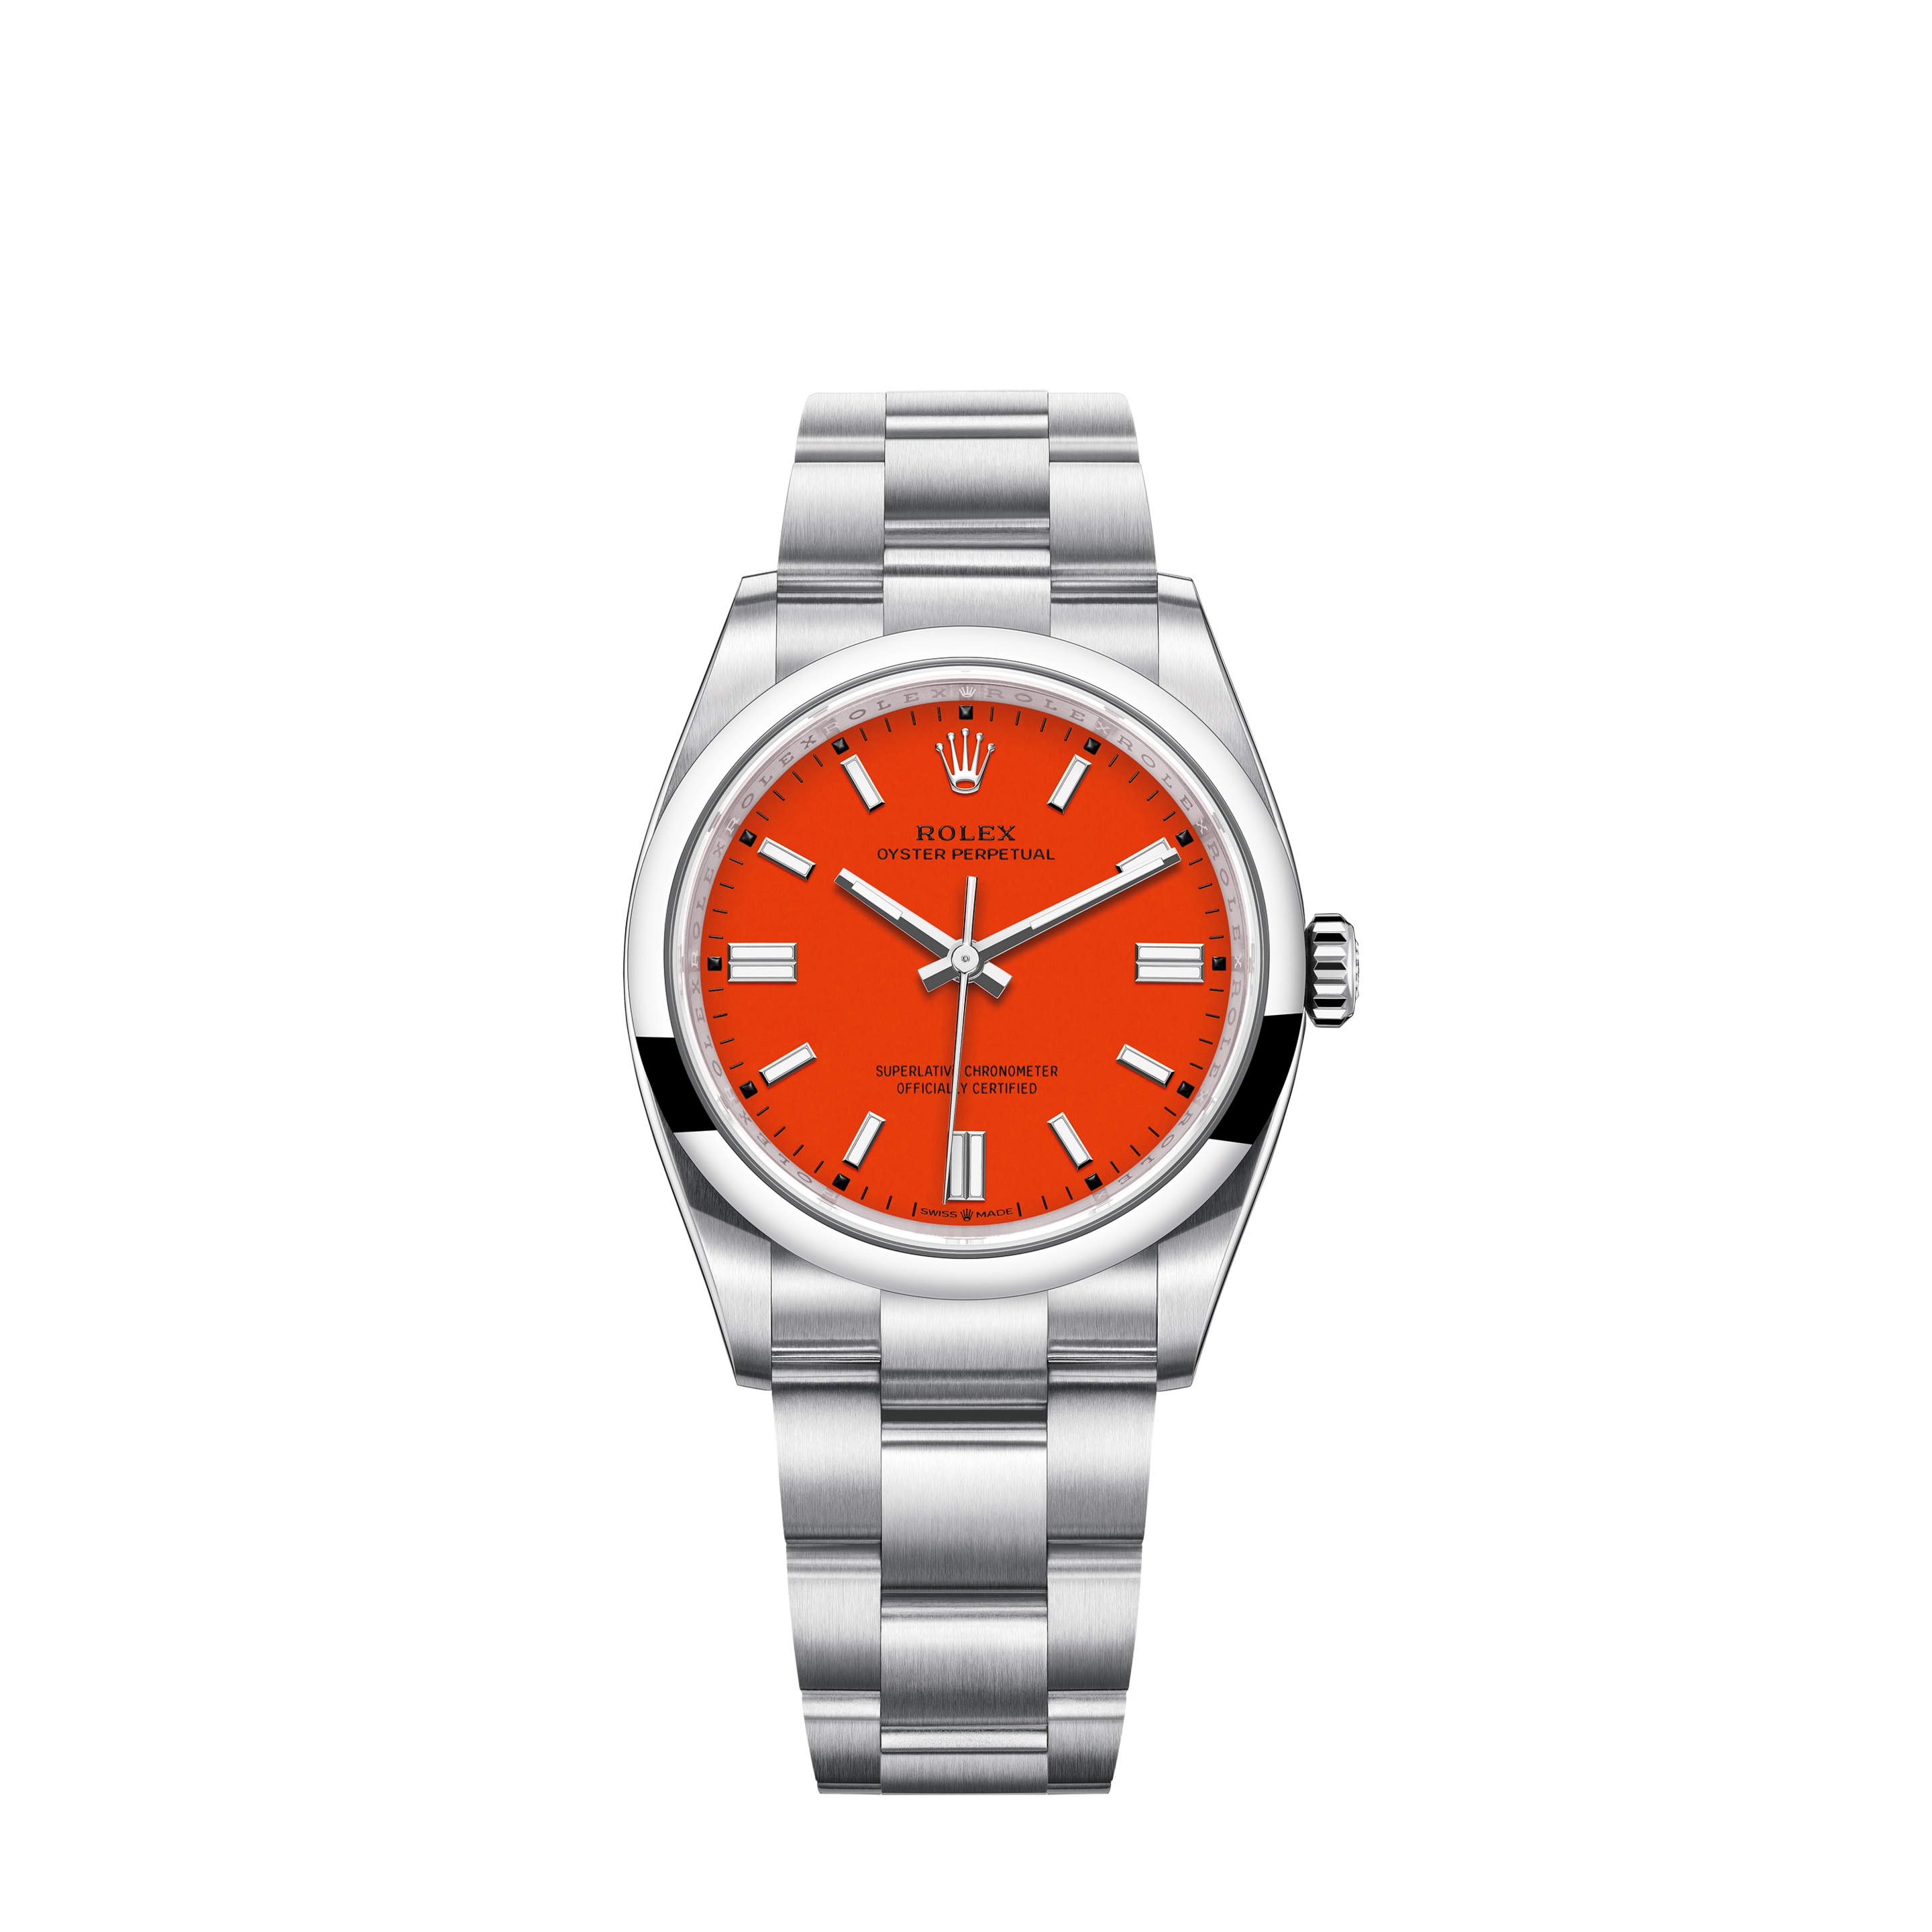 Oyster Perpetual 36 126000 Stainless Steel Watch (Coral Red)